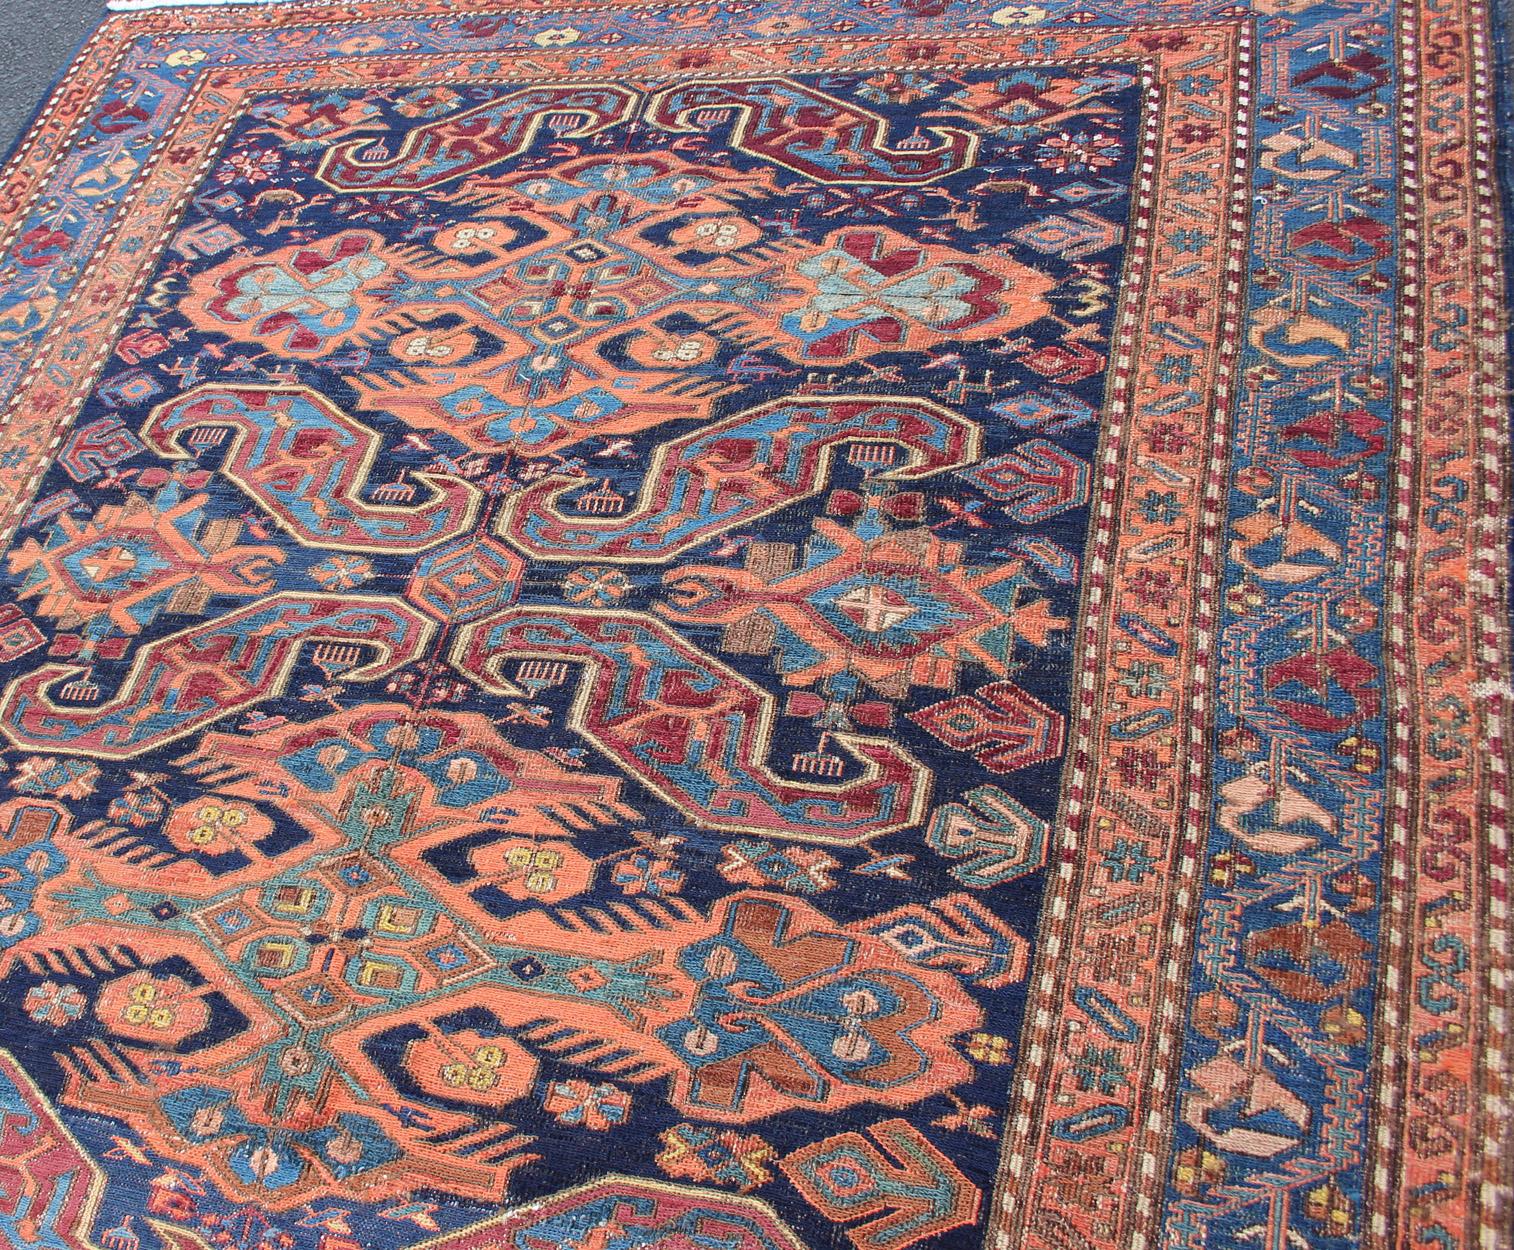 Hand-Woven Antique Caucasian 19th Century Sumac Rug in Varying Colors of Orange and Blue For Sale